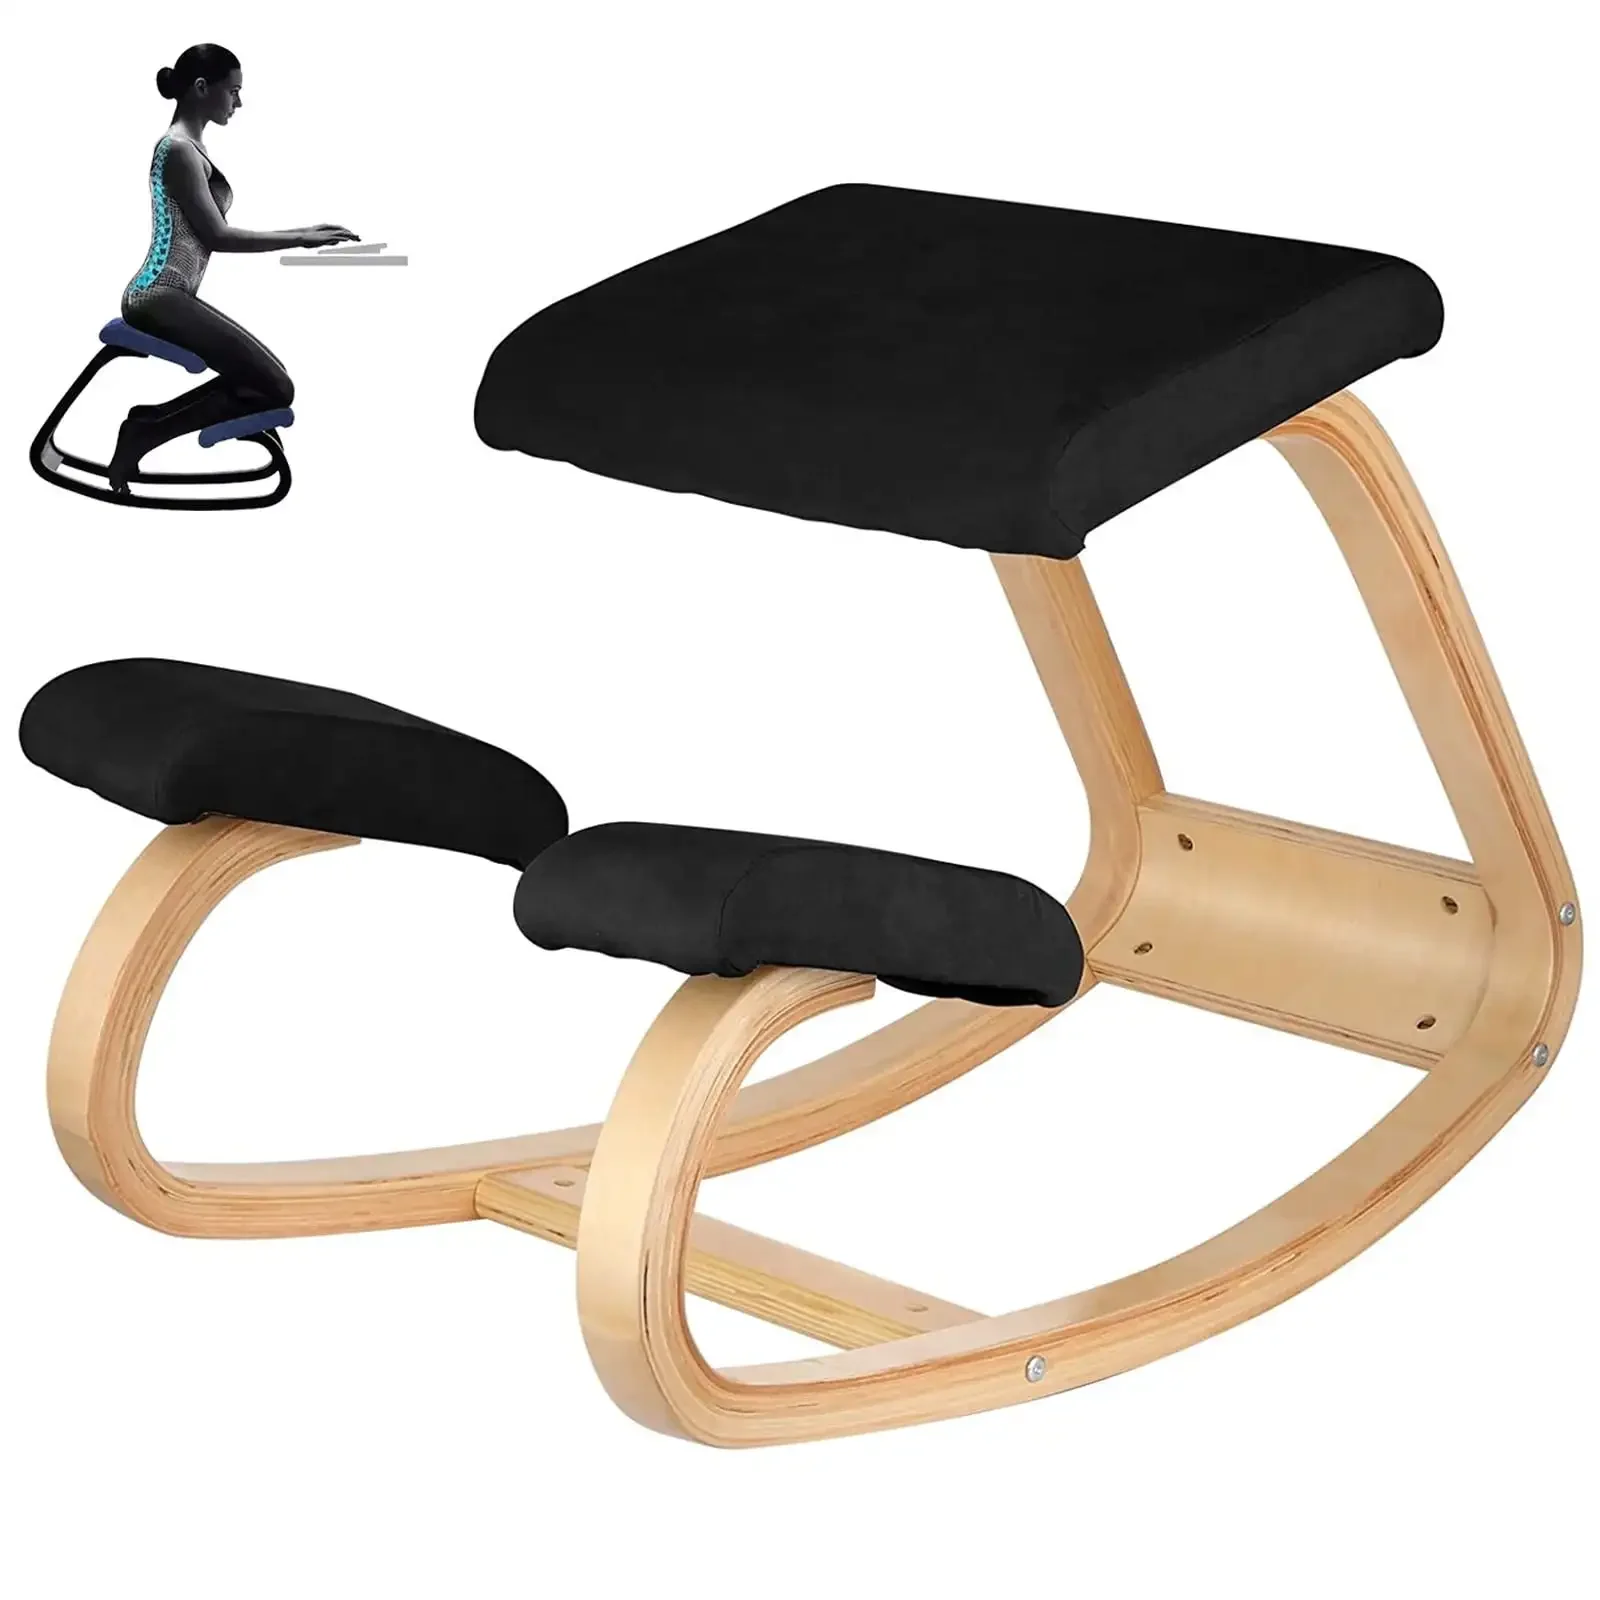 Kneeling Chair Meditation Seat with Wood Frame Home Office - $255.76